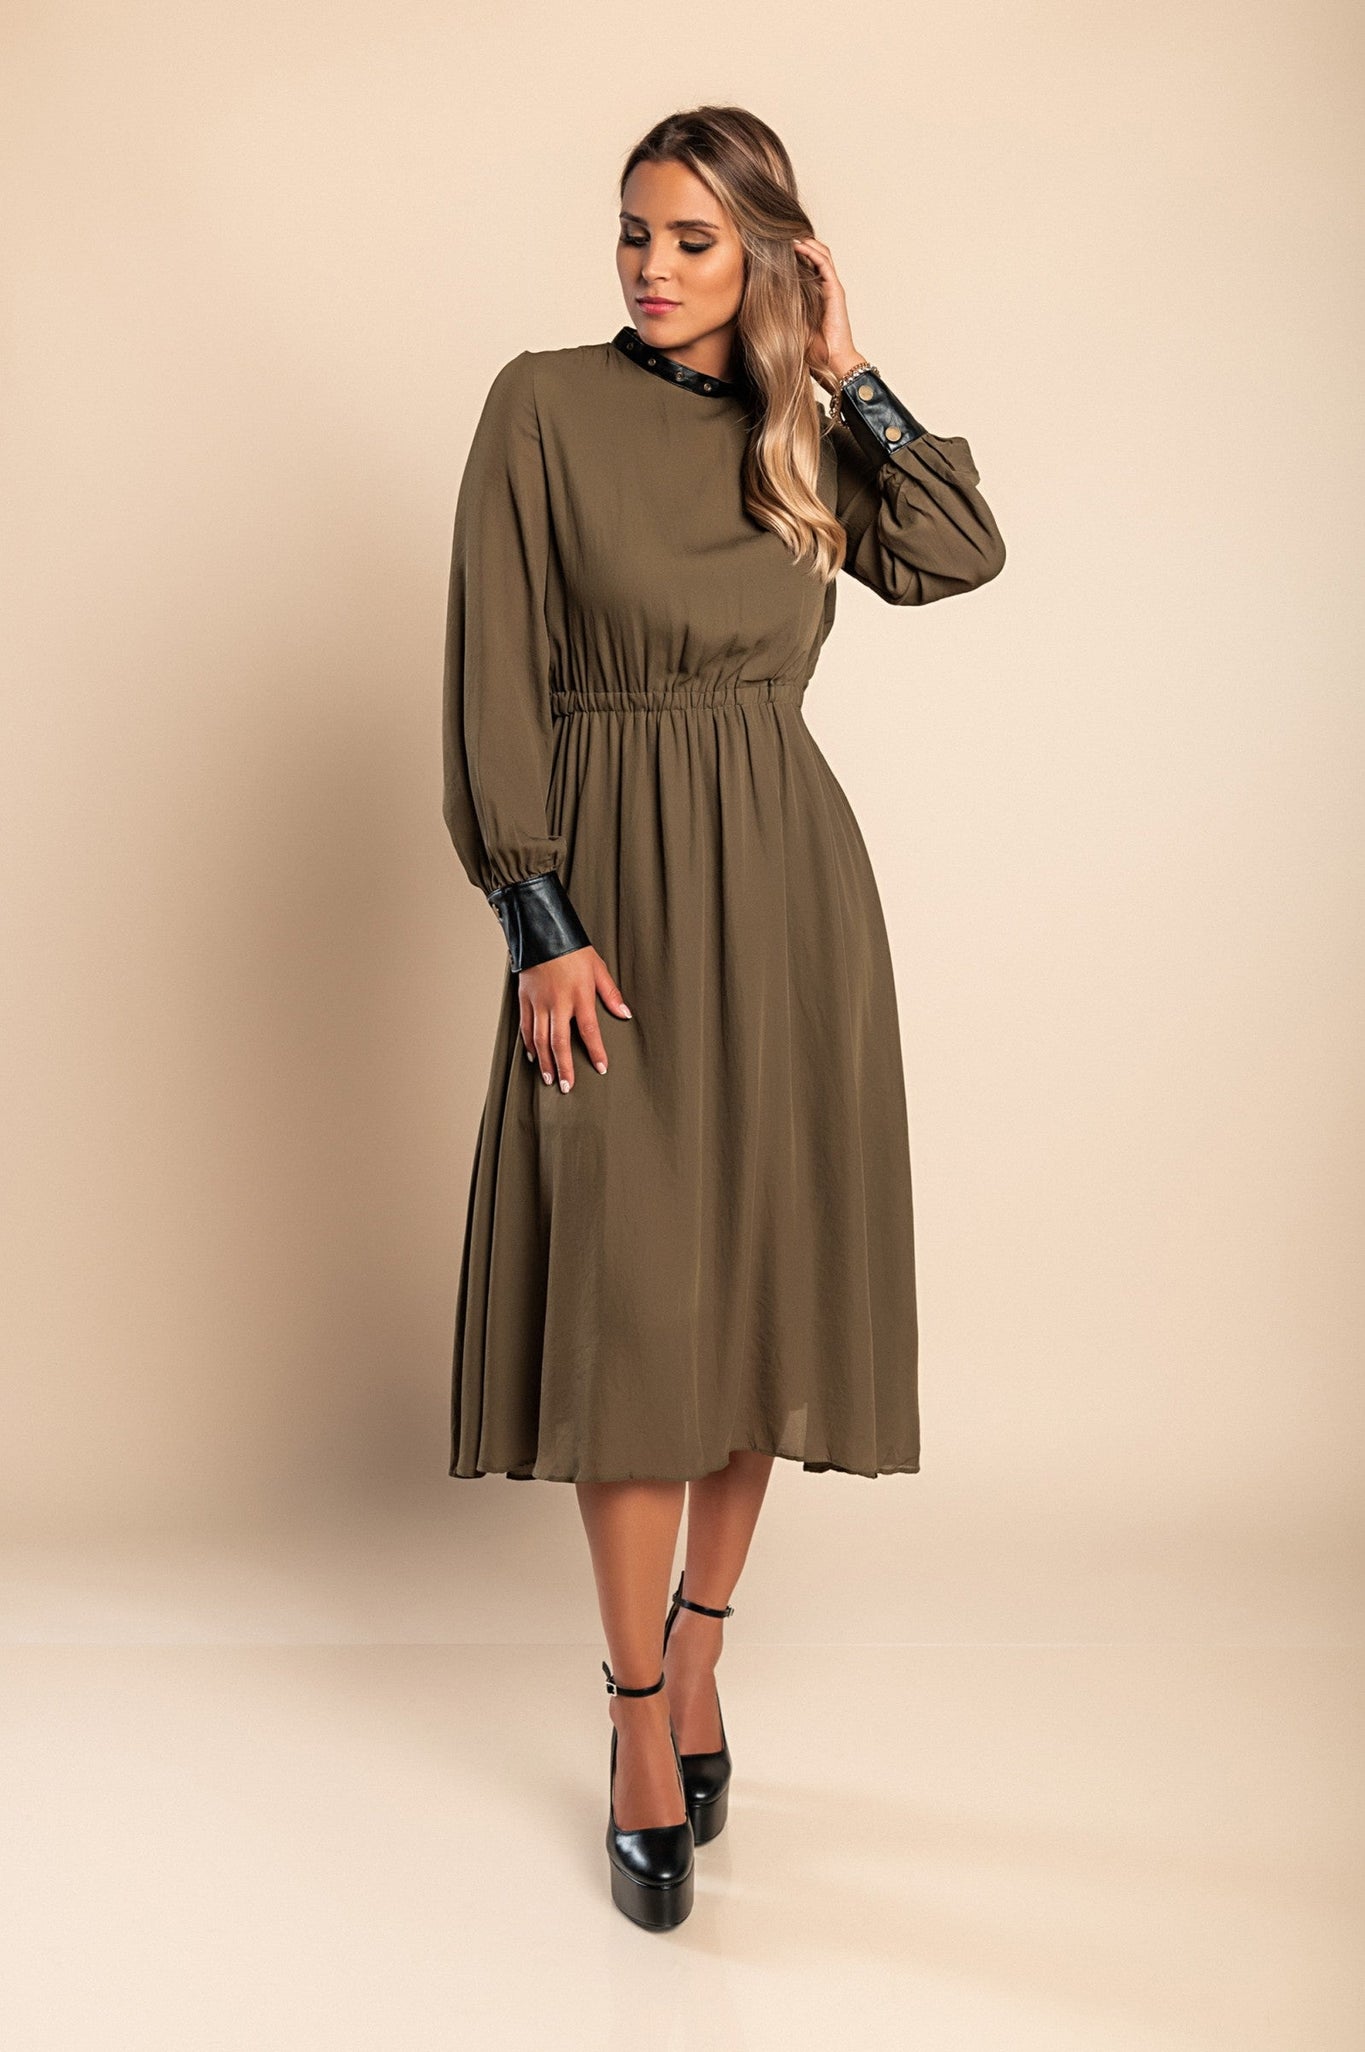 Elegant midi dress with Plana artificial leather inserts, olive